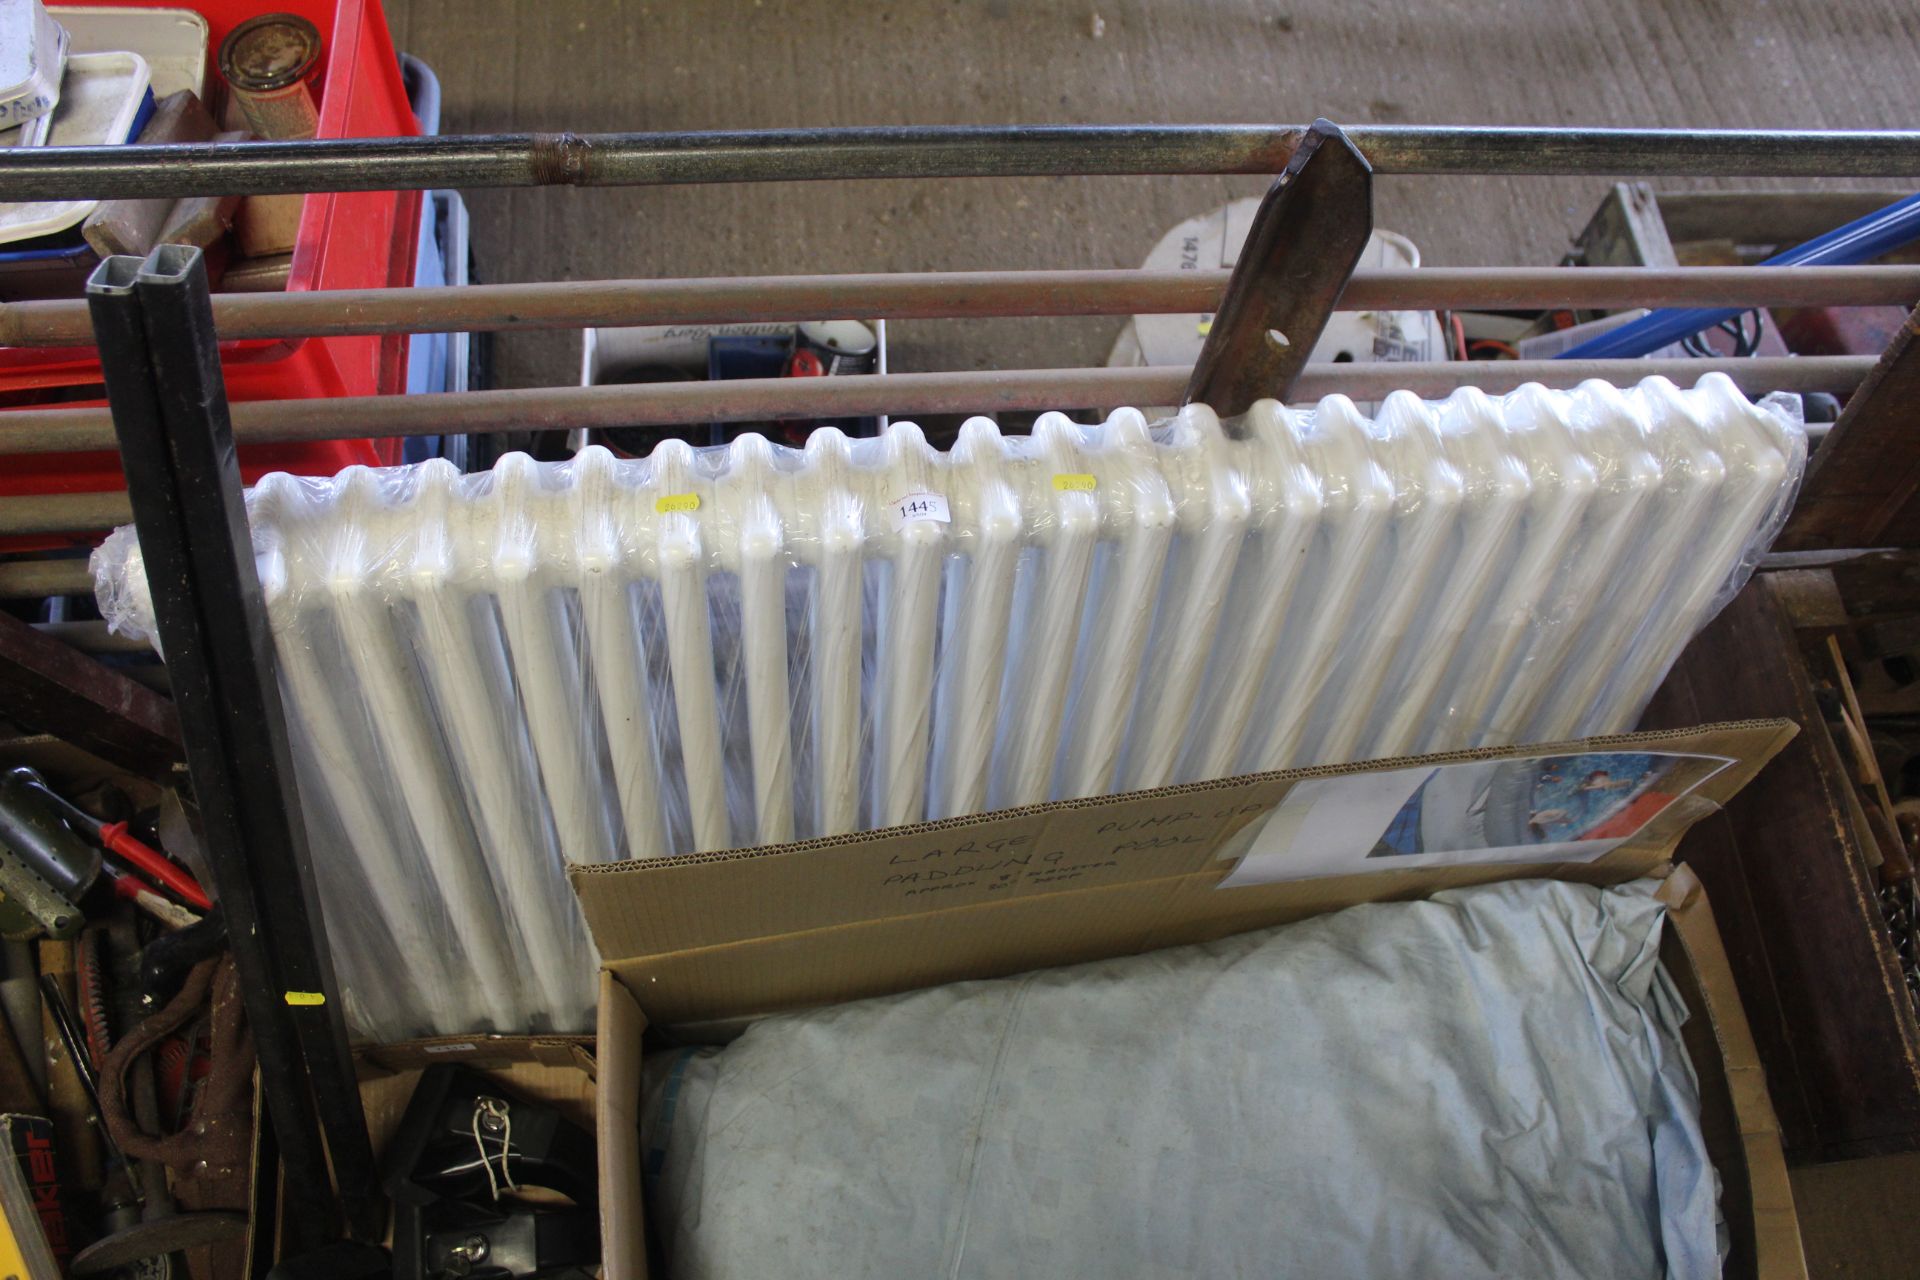 A radiator measuring approx. 41" wide